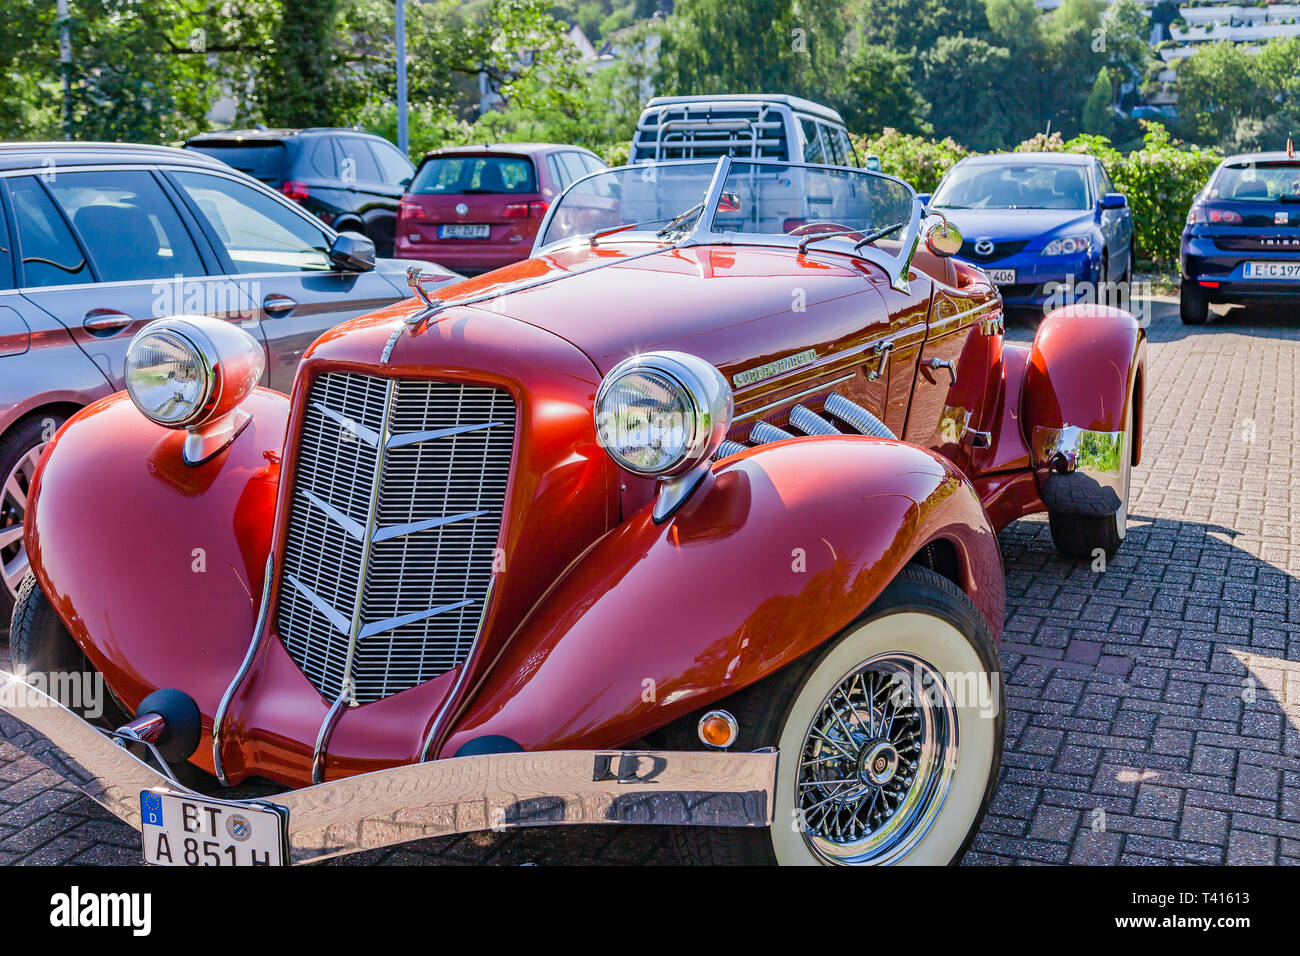 Muehlheim, Germany - September 10, 2016: Super Charged Auburn 851 Boattail Classic. Auburn was a brand name of American automobiles produced in Auburn Stock Photo